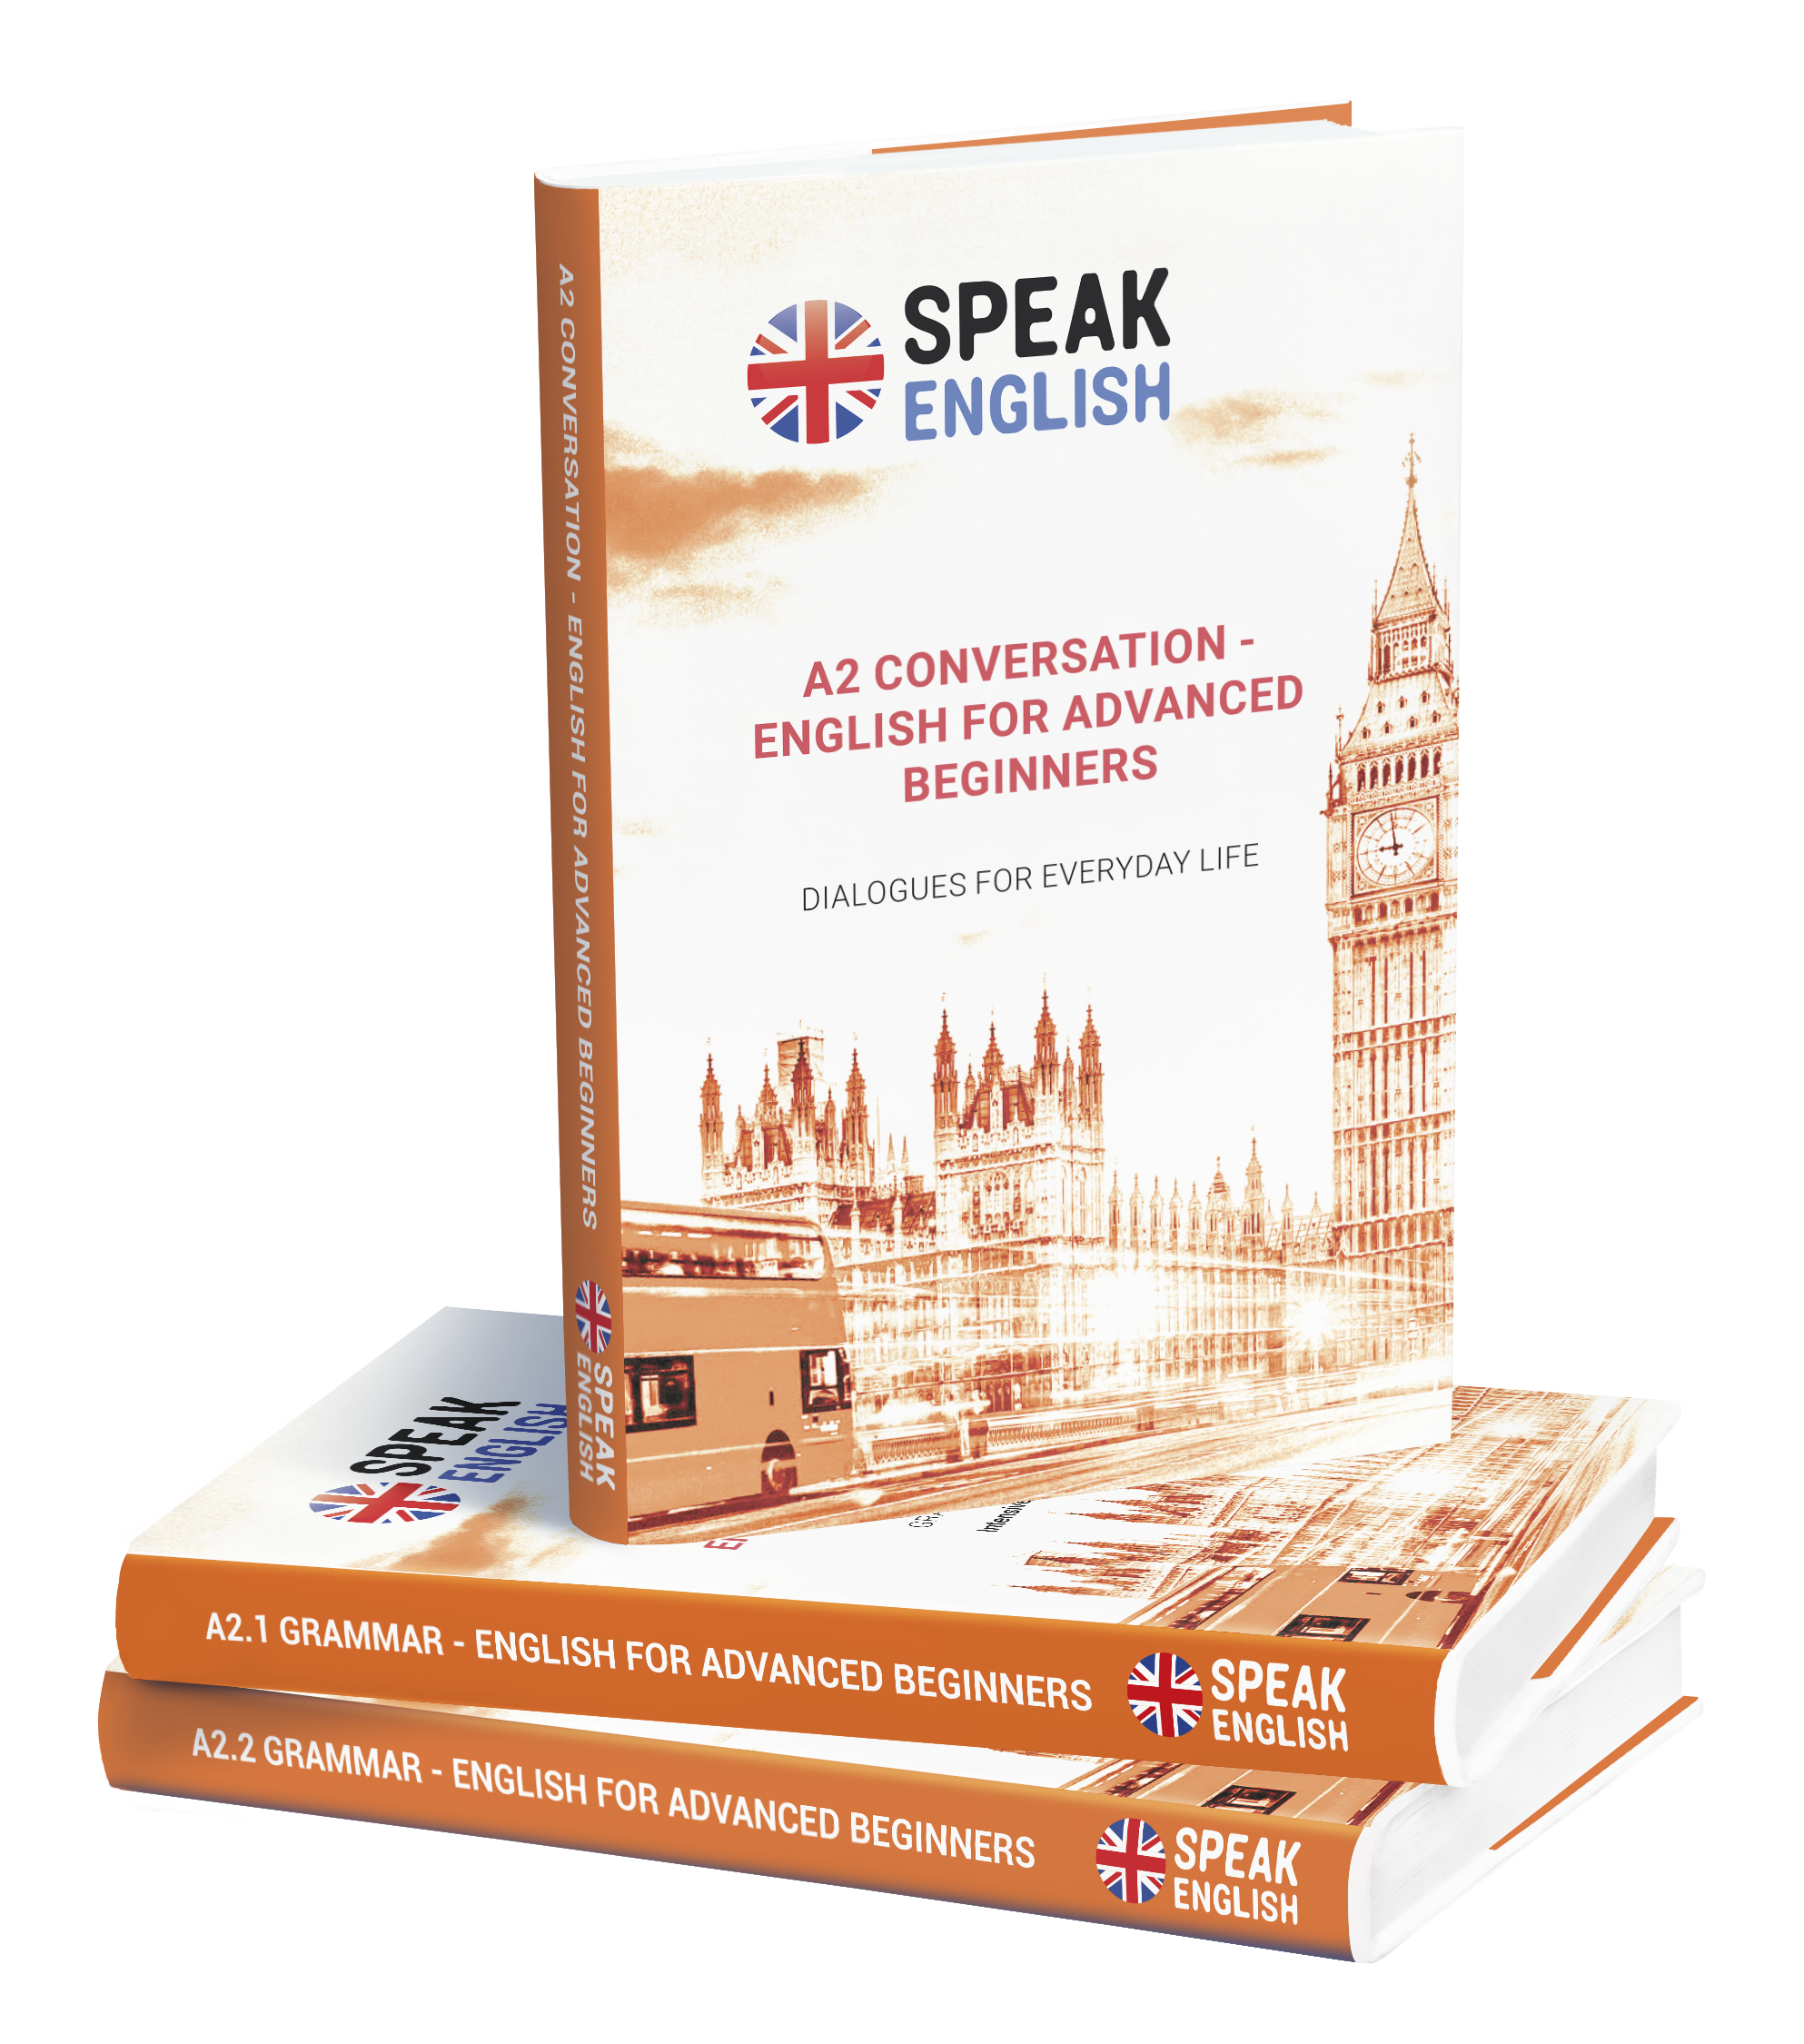 A2 level English books included in the price